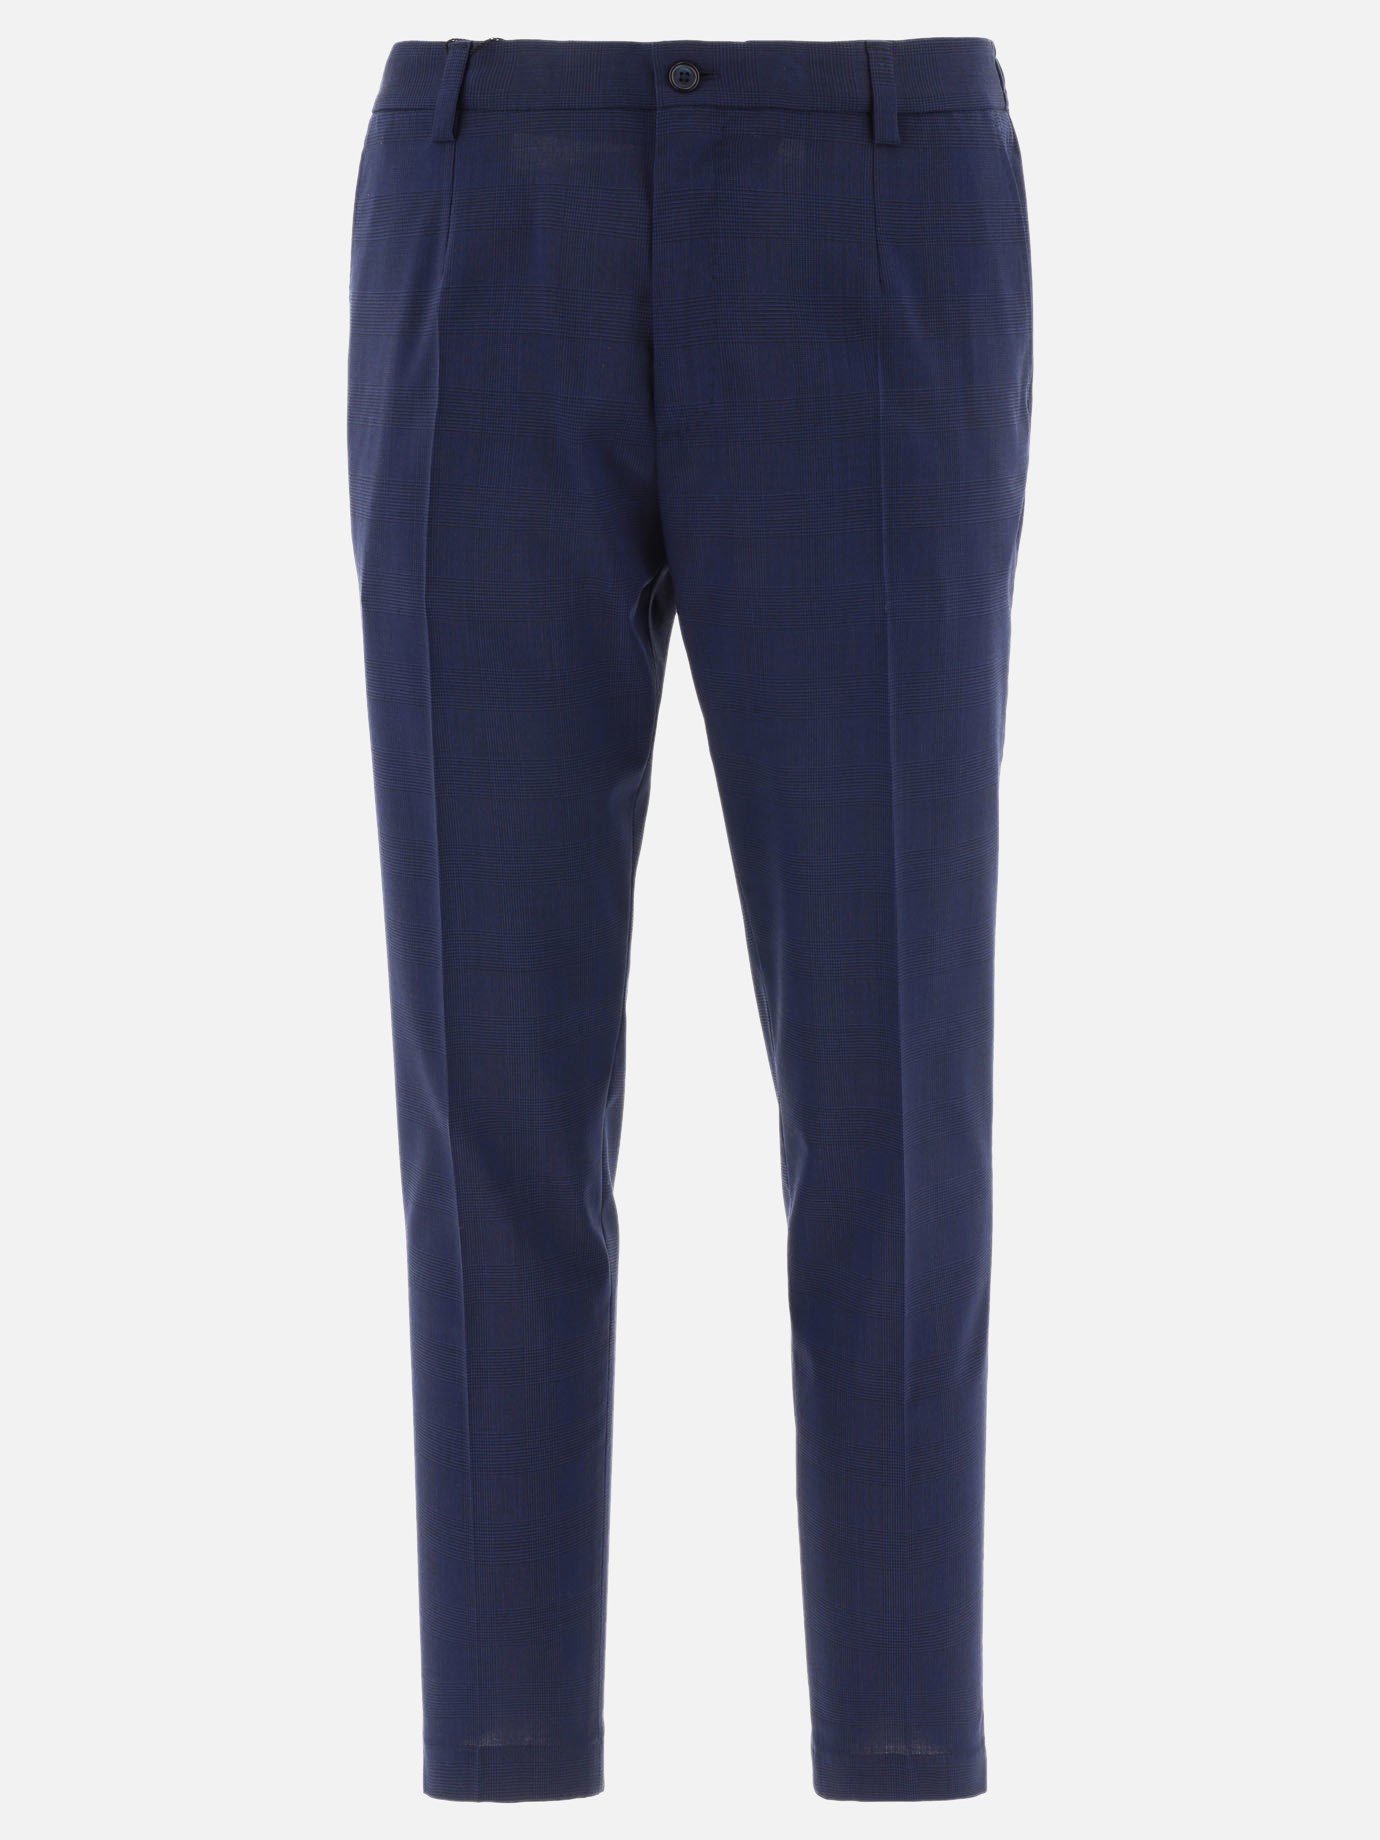 Stretch wool trousers by Dolce & Gabbana